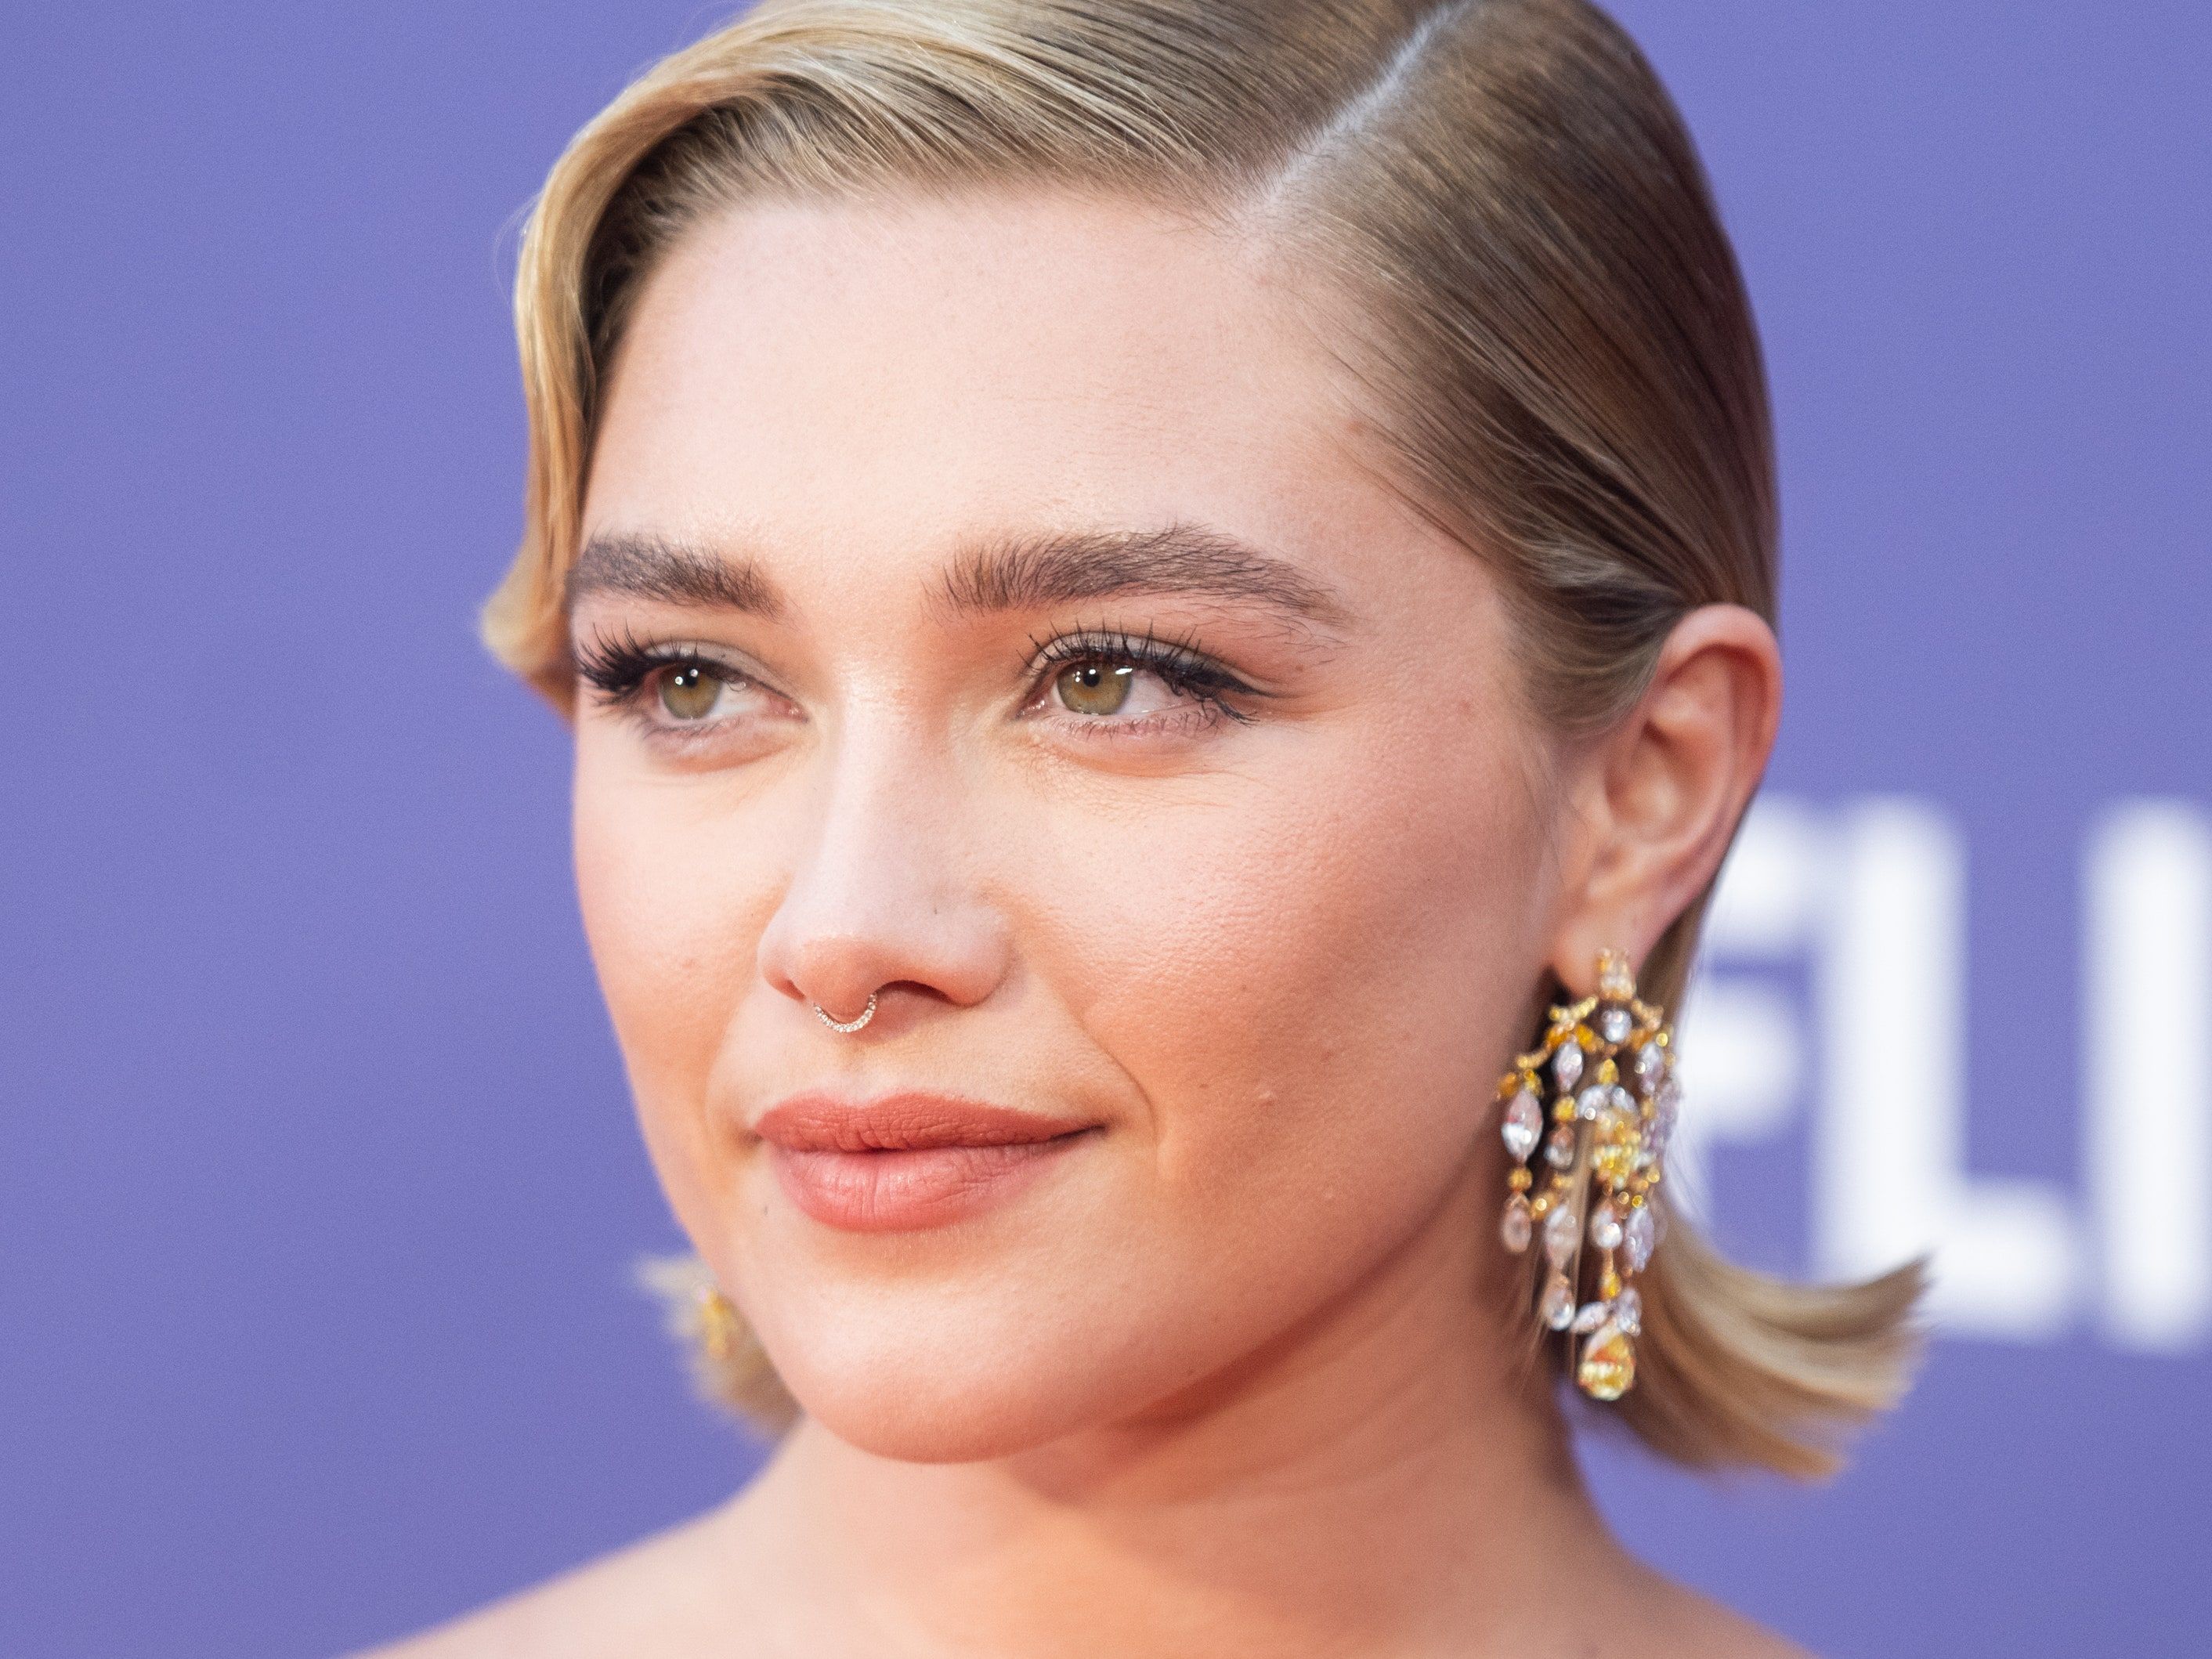 Florence Pugh Went Full '60s Mod In Mismatched Monochrome Outfit And Go Go Boots